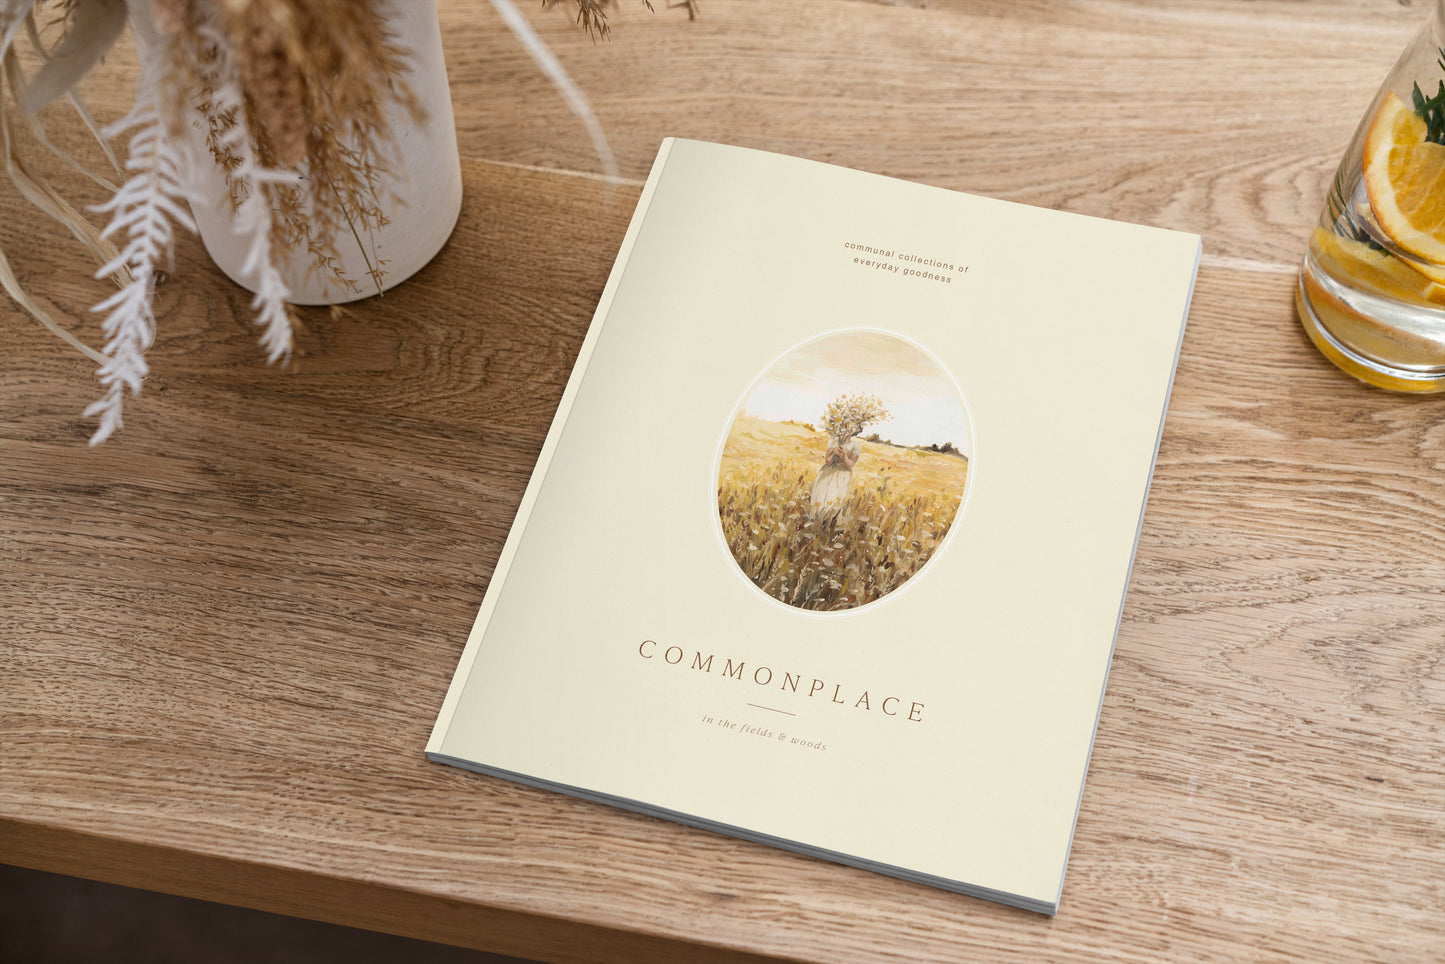 Commonplace Vol. 02 - In the Fields & Woods